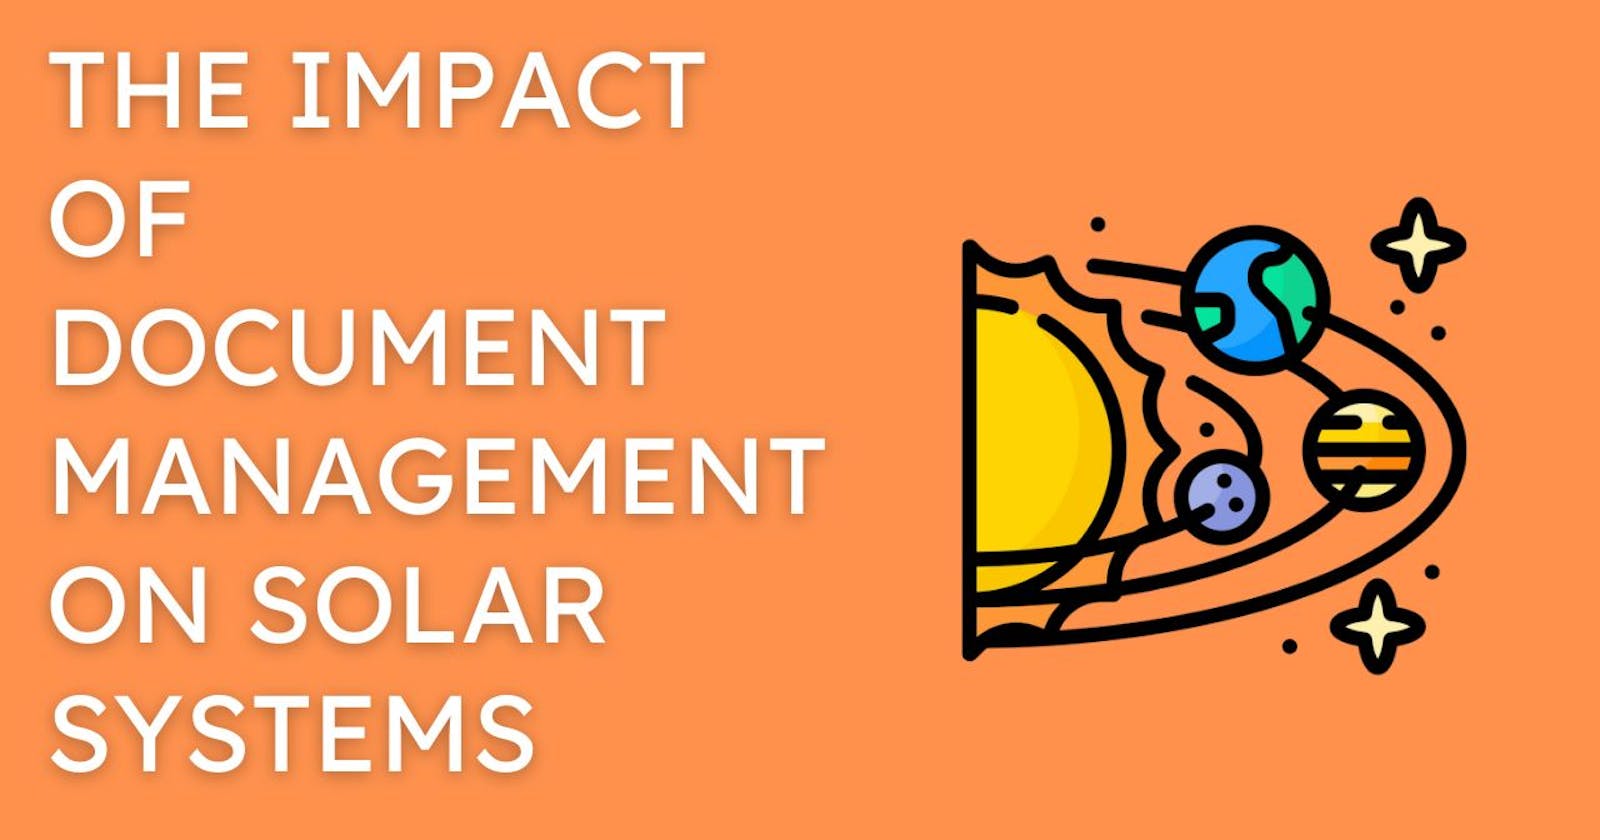 The Impact of Document Management on Solar Systems